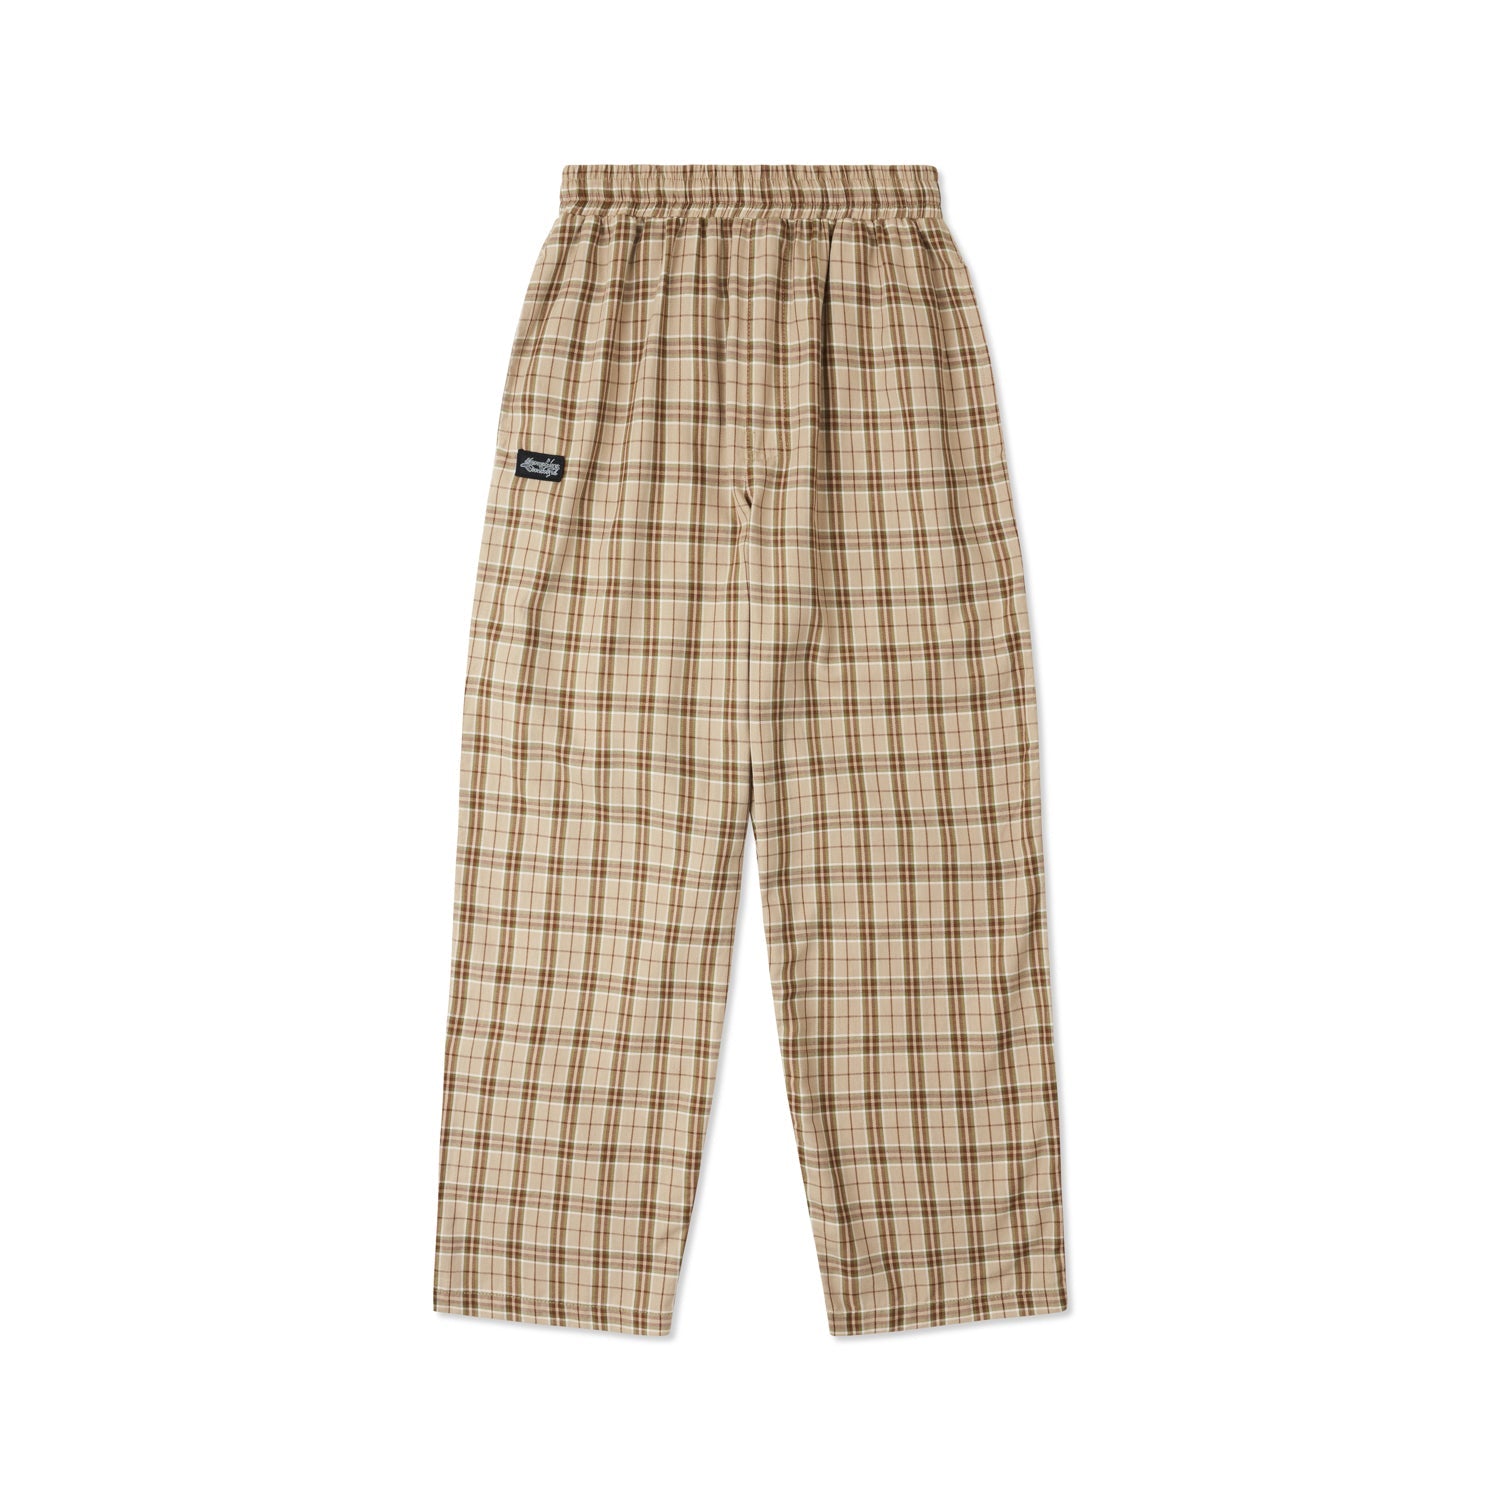 PLAID OUT PANT - BROWN